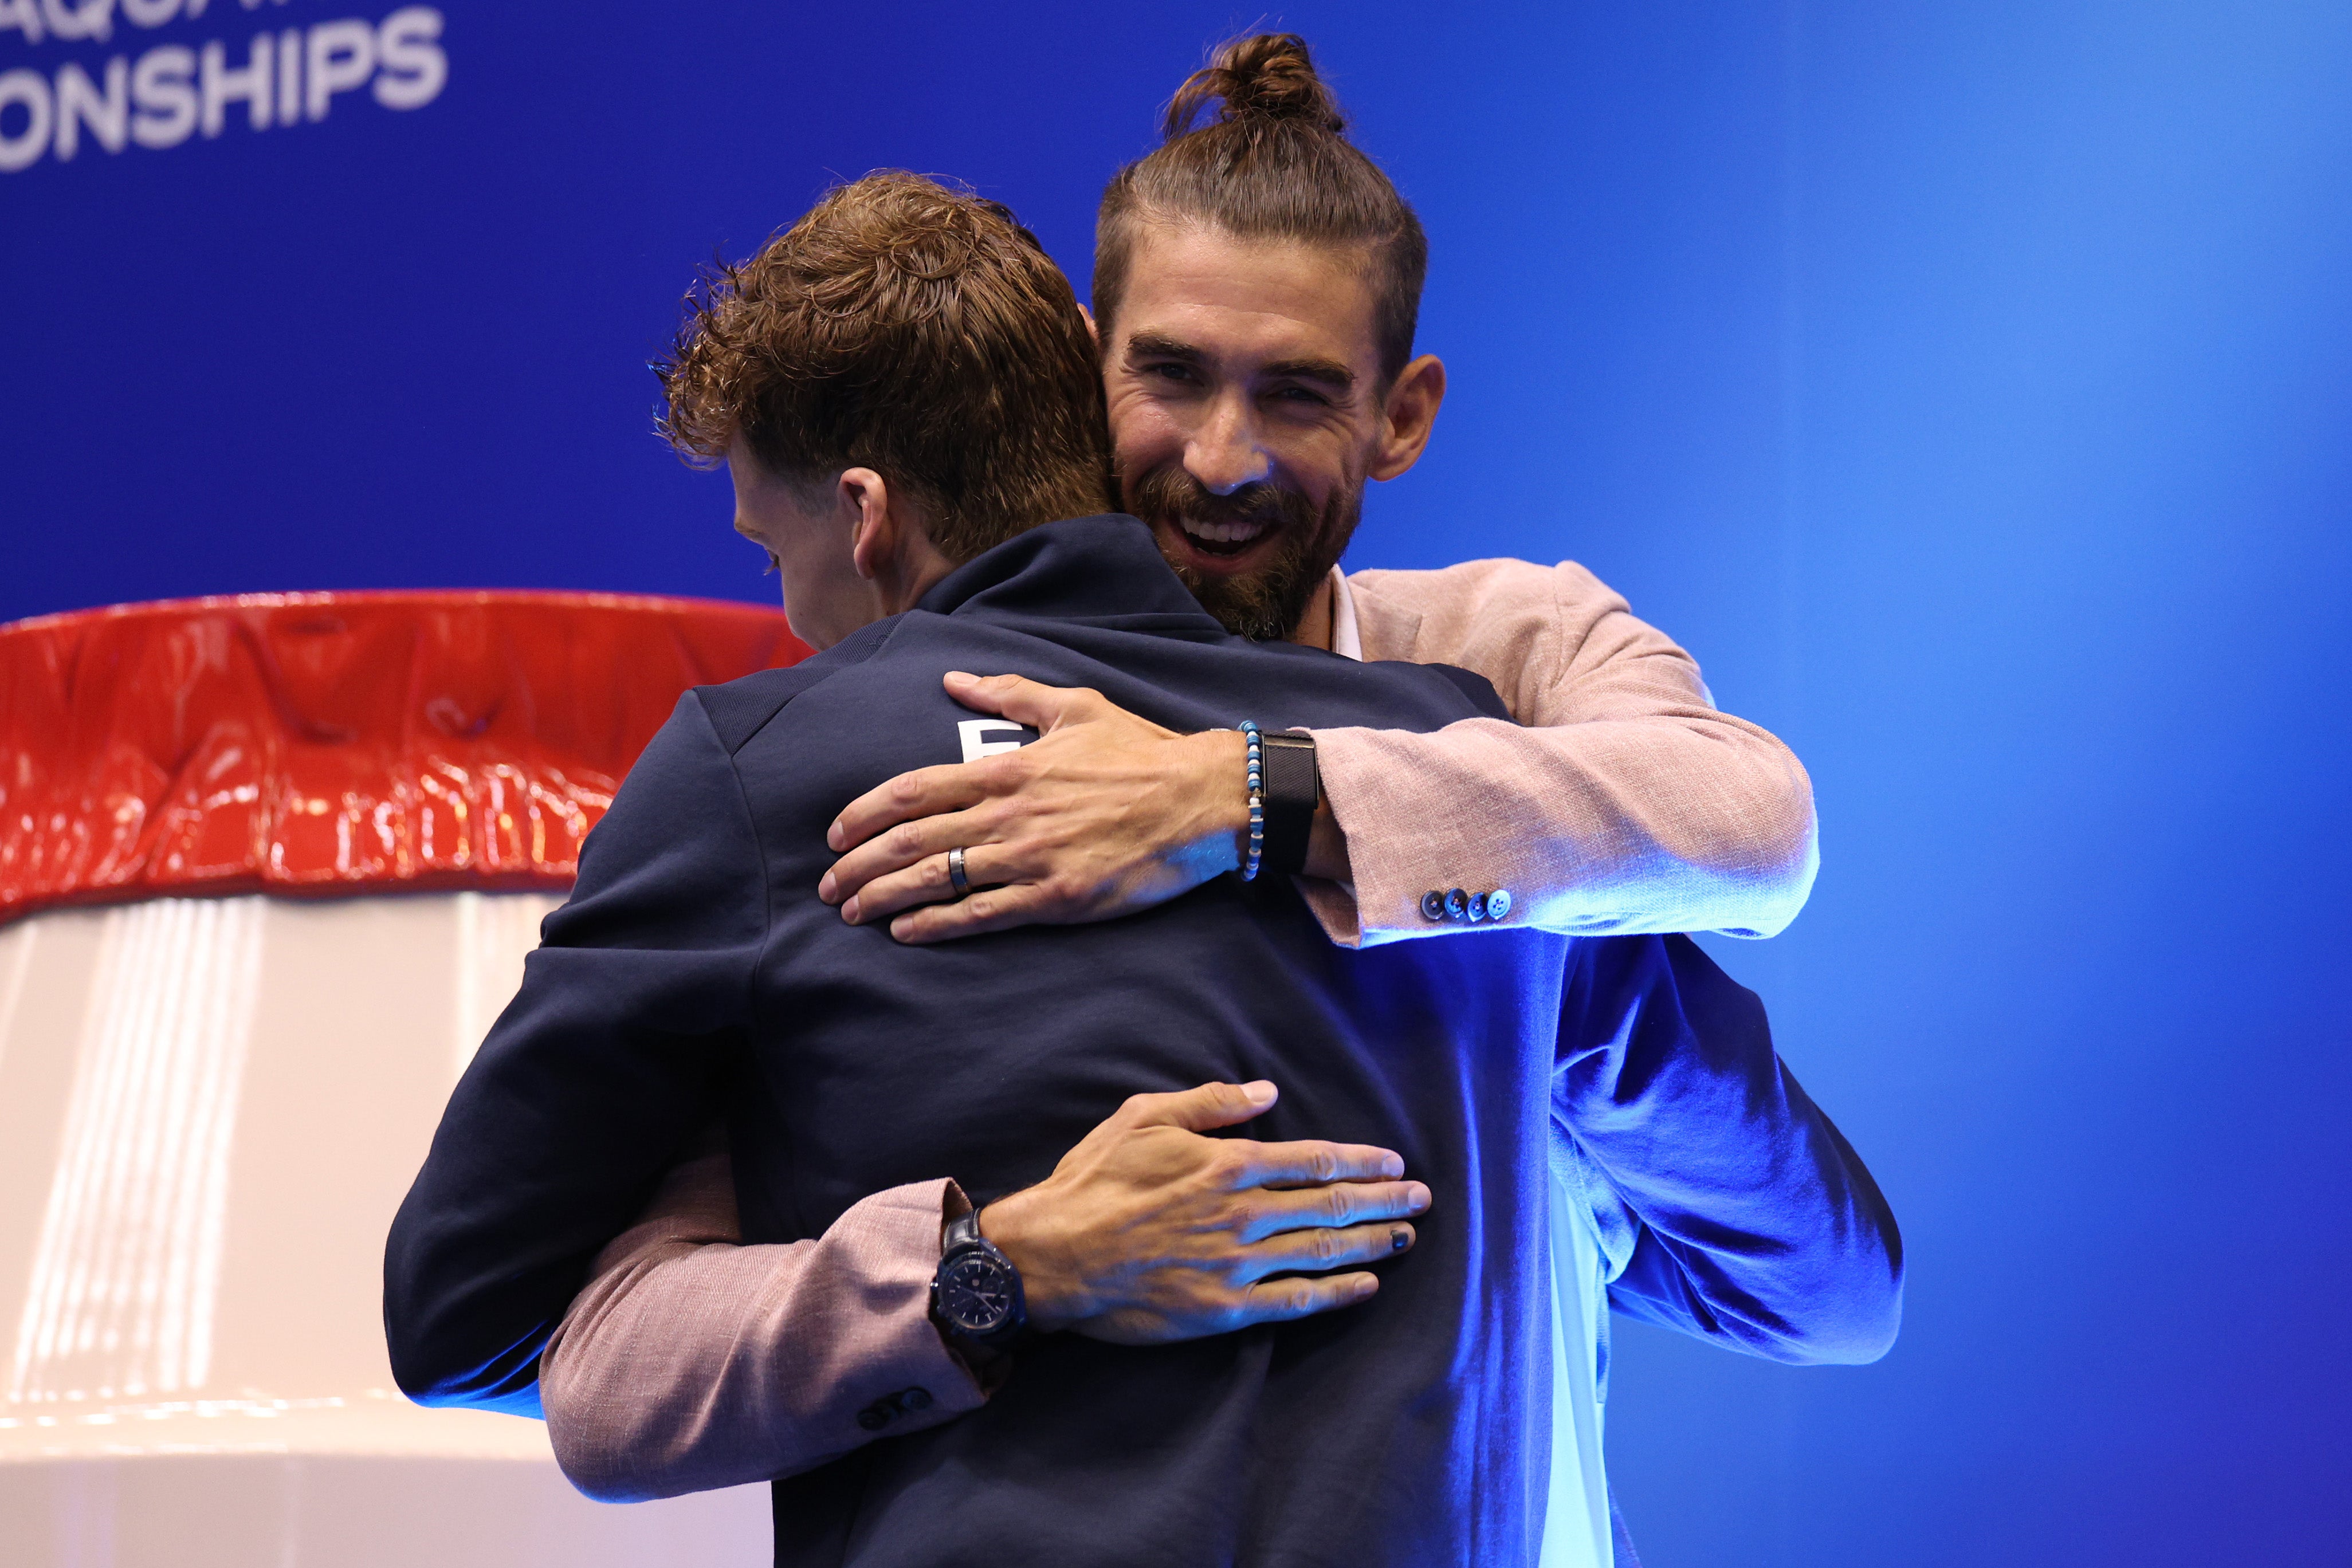 Phelps congratulated Marchand on his performance